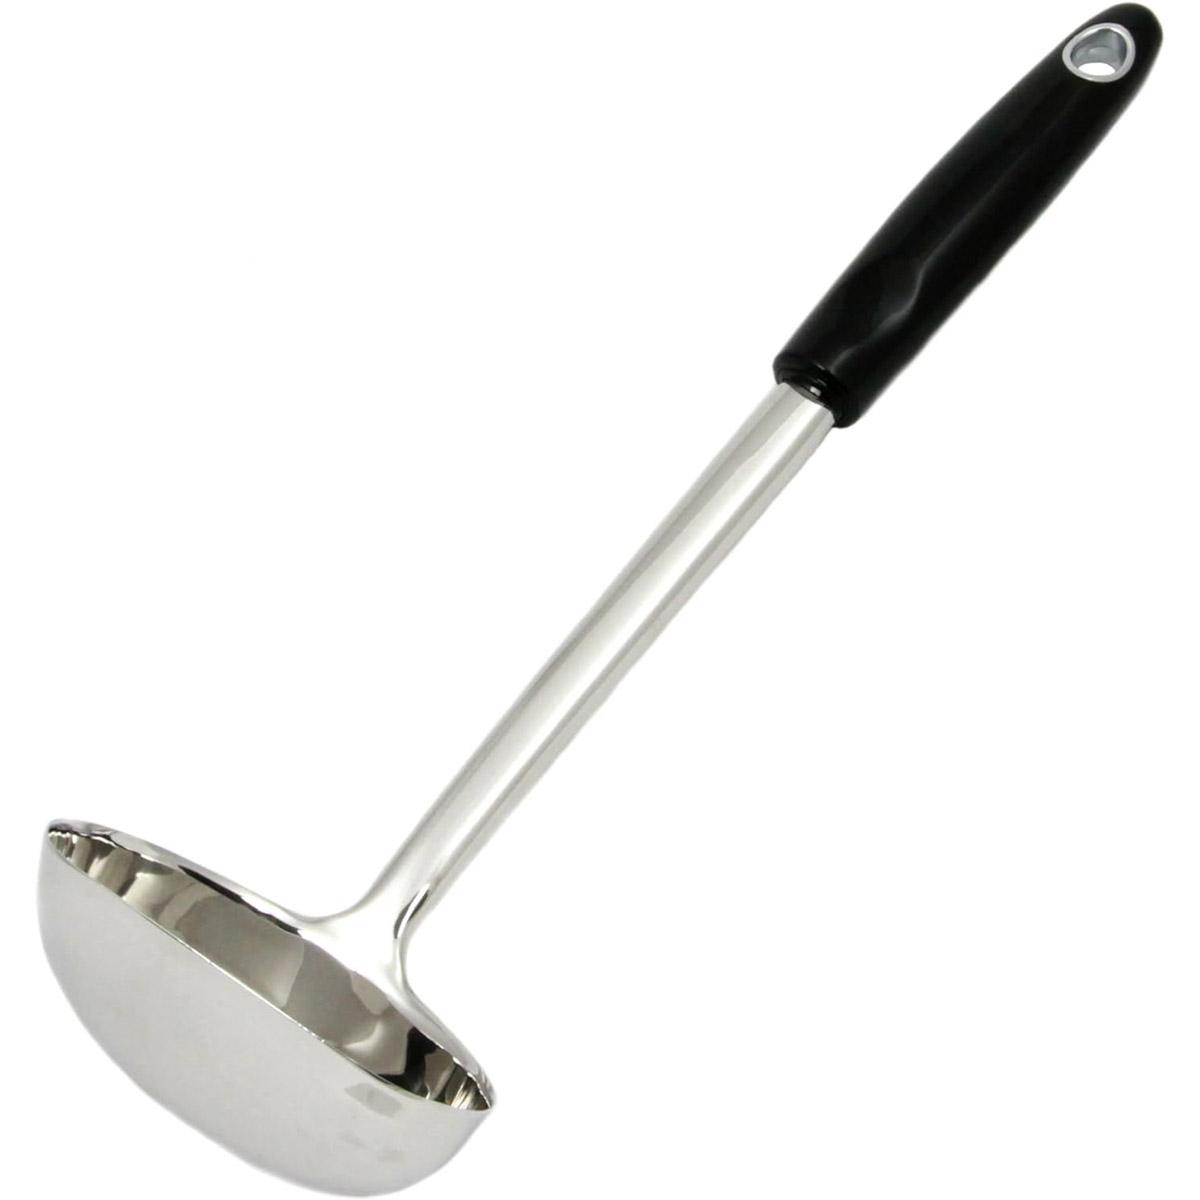 Chef Craft Heavy Duty Ladle for $3.99